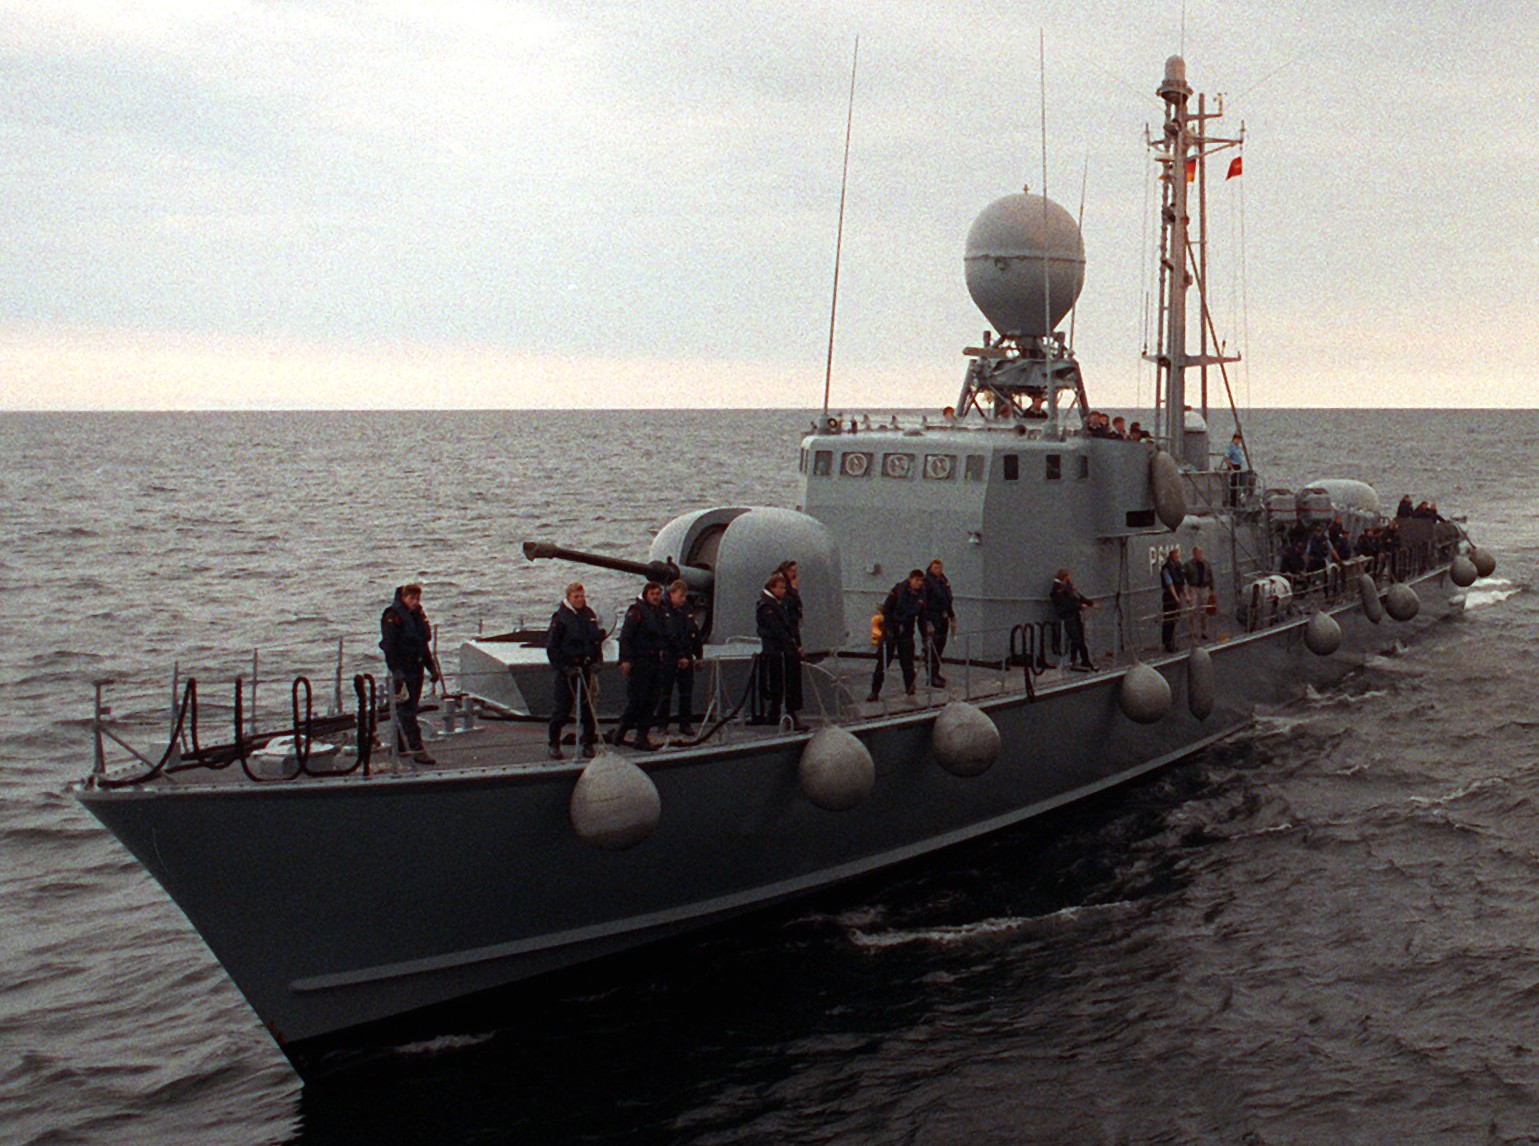 p6118 s68 fgs seeadler type 143 albatros class fast attack missile craft boat german navy 02